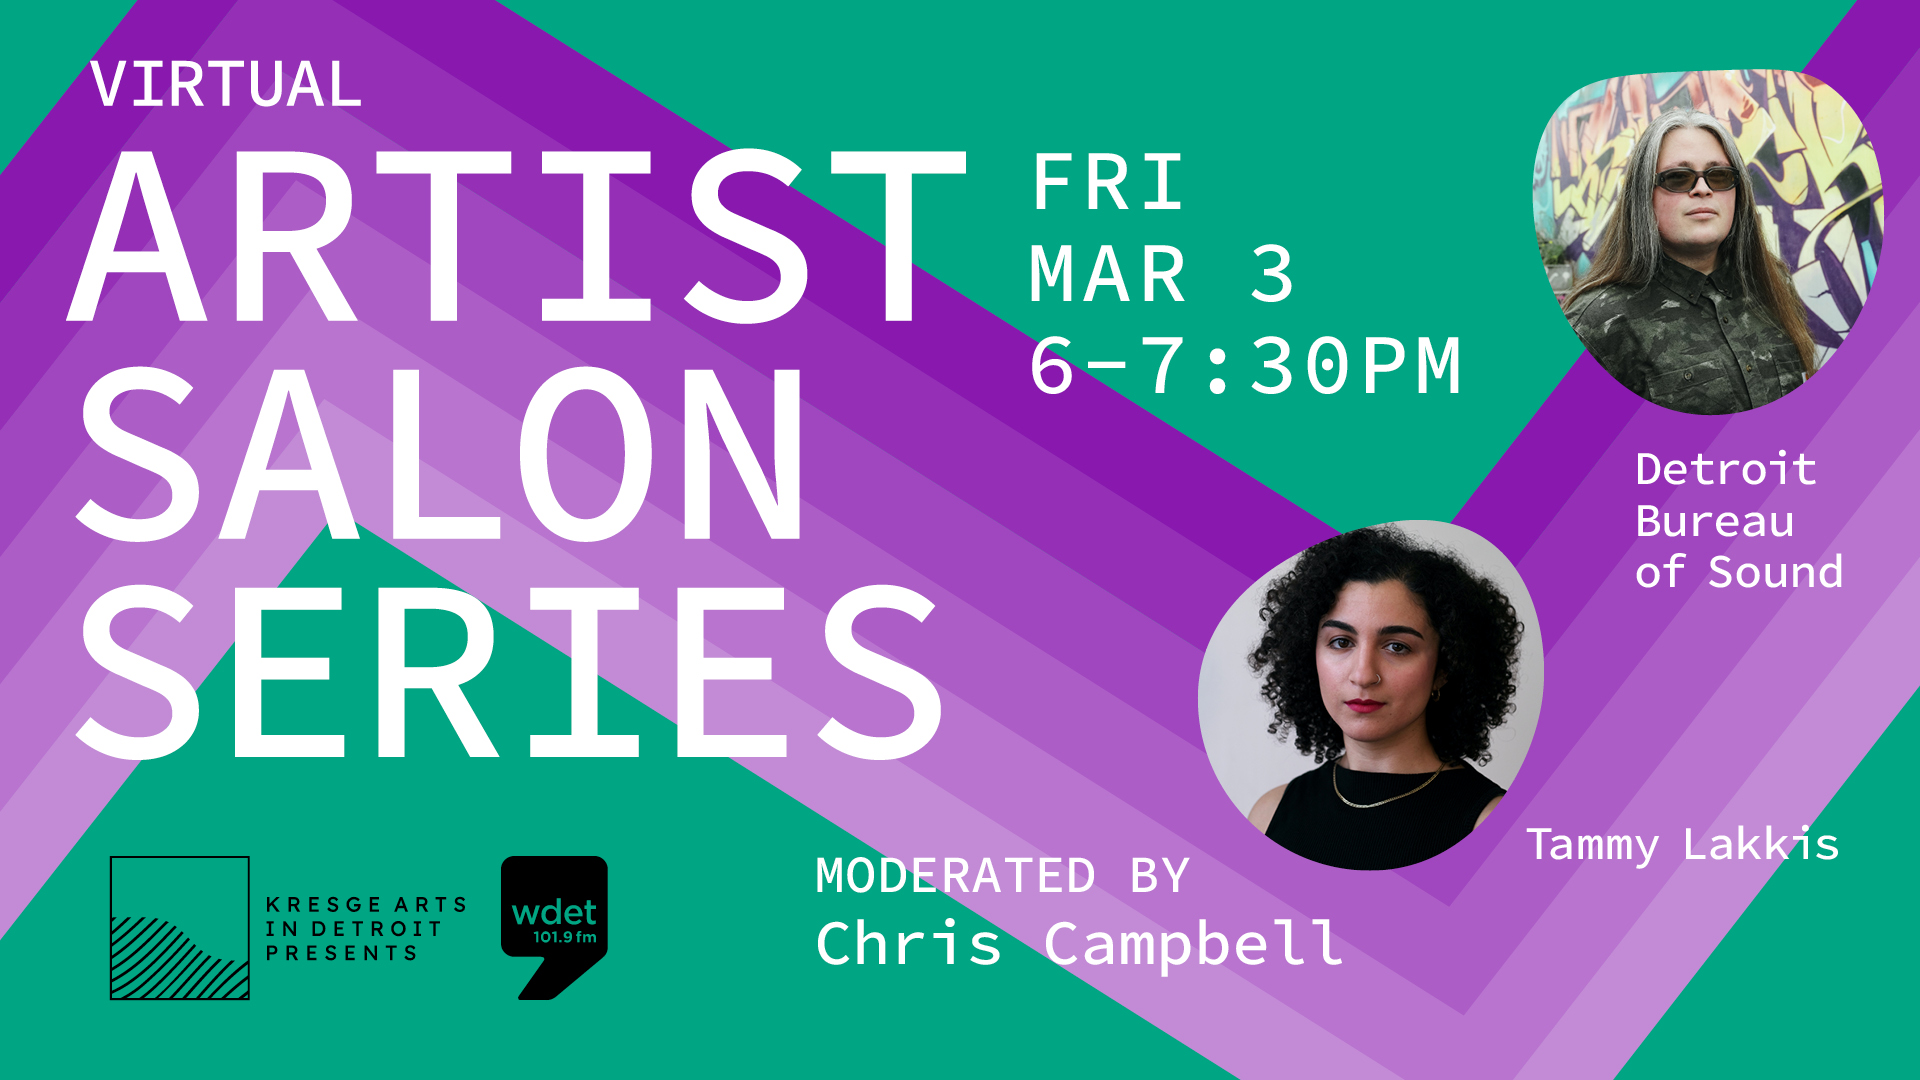 green and purple graphic promoting Kresge's Virtual Artist Salon Series with Detroit Bureau of Sound and Tammy Lakkis